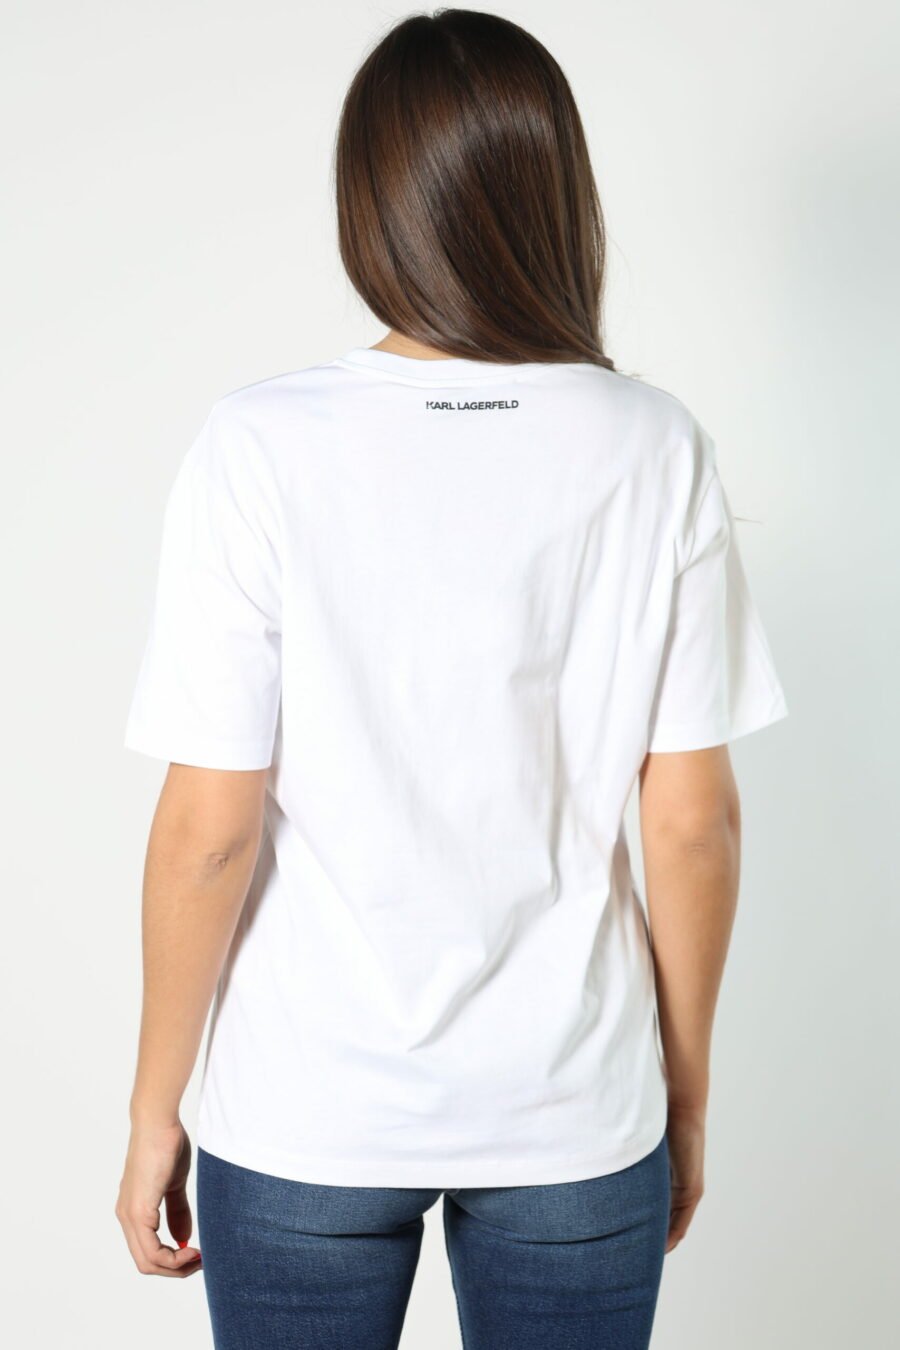 White T-shirt with black "face" logo - 8052865435499 386 scaled